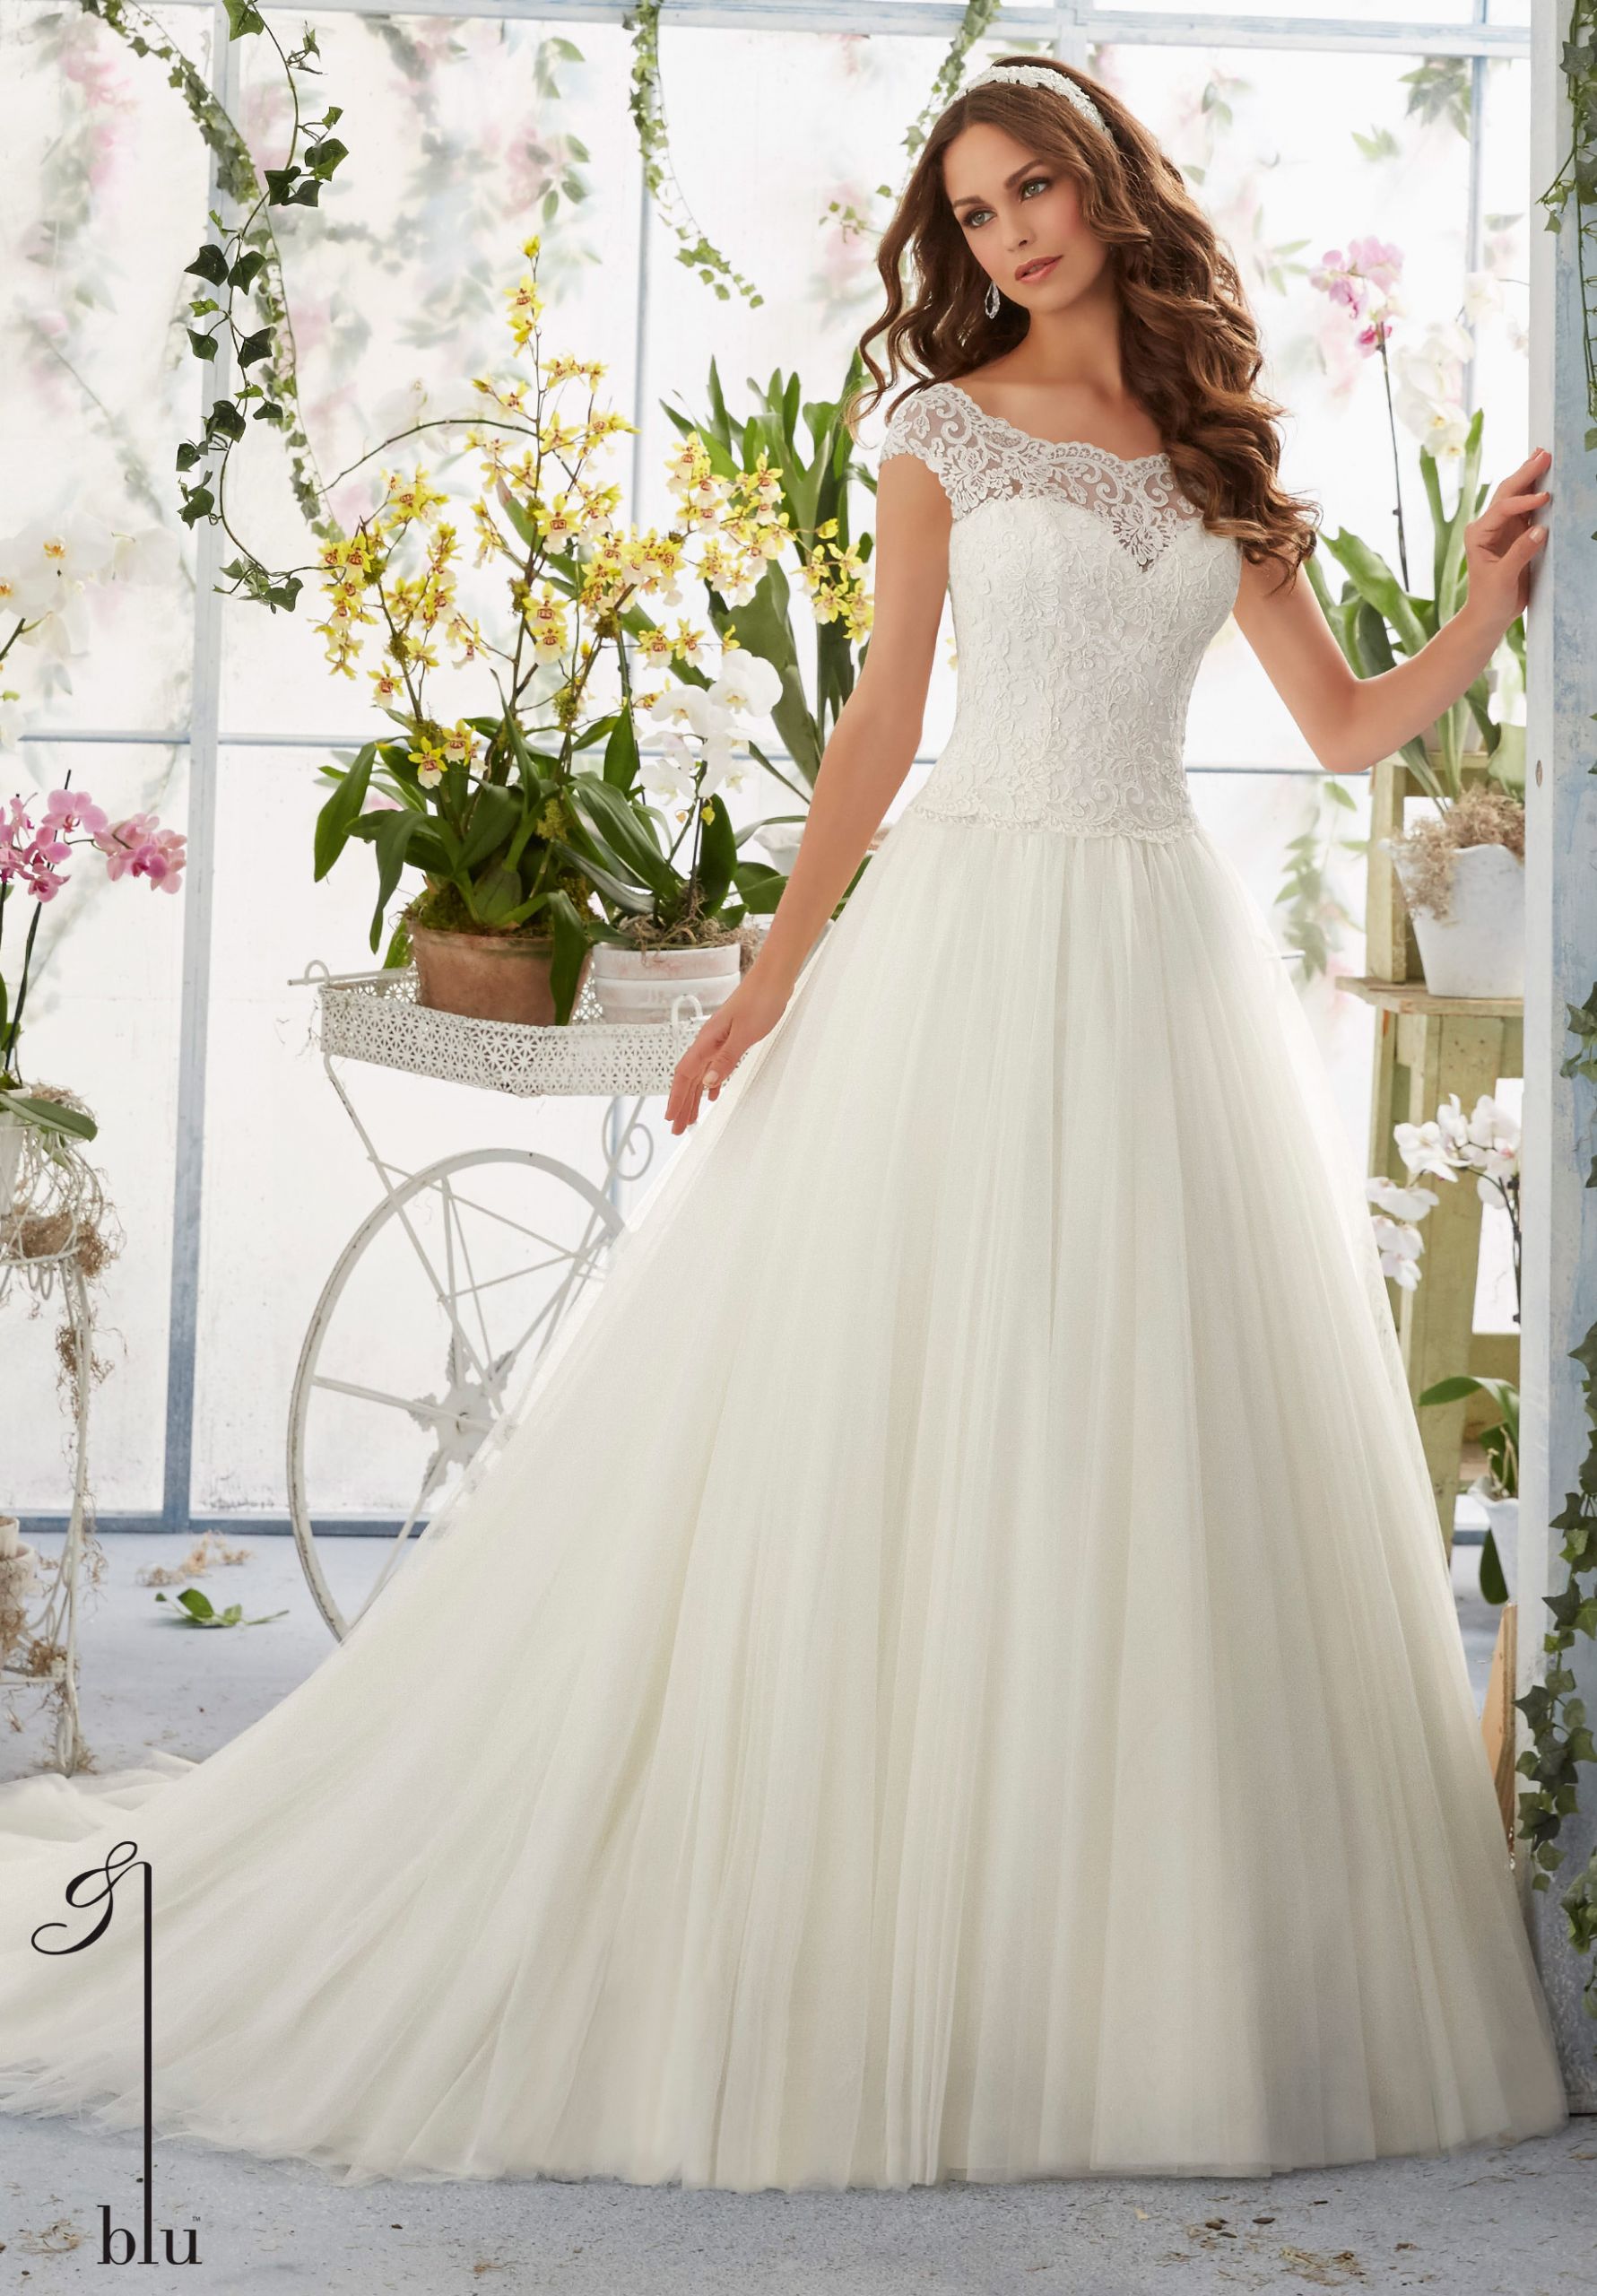 Wedding Gown Prices
 All You Need to Know About Mori Lee Bridal Gowns – Costs